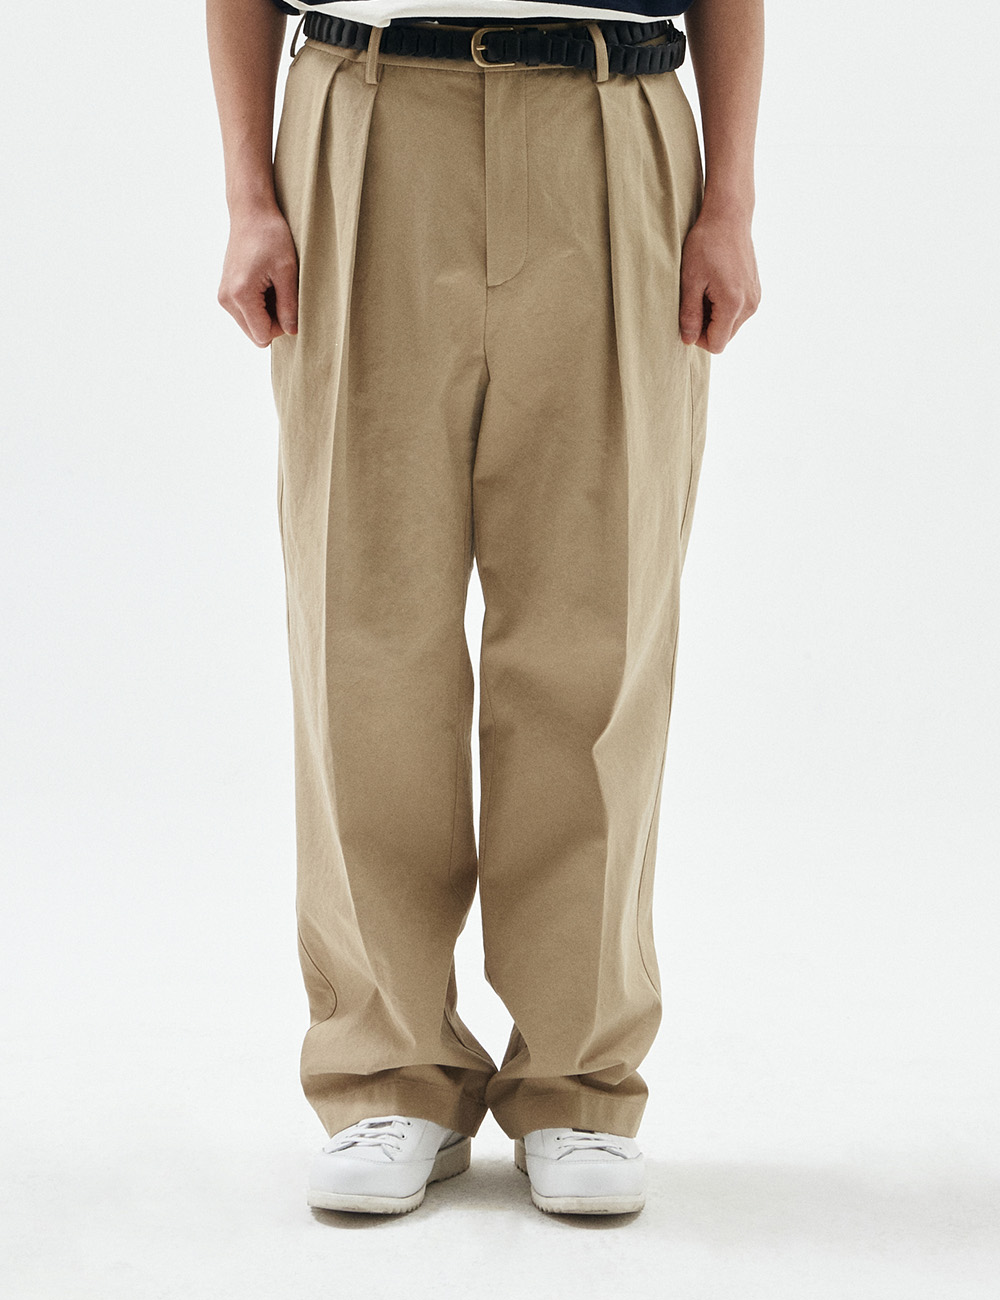 [ESFAI] DOUBLE PLEATED WIDE CHINO PANTS PPP40 (BEIGE)